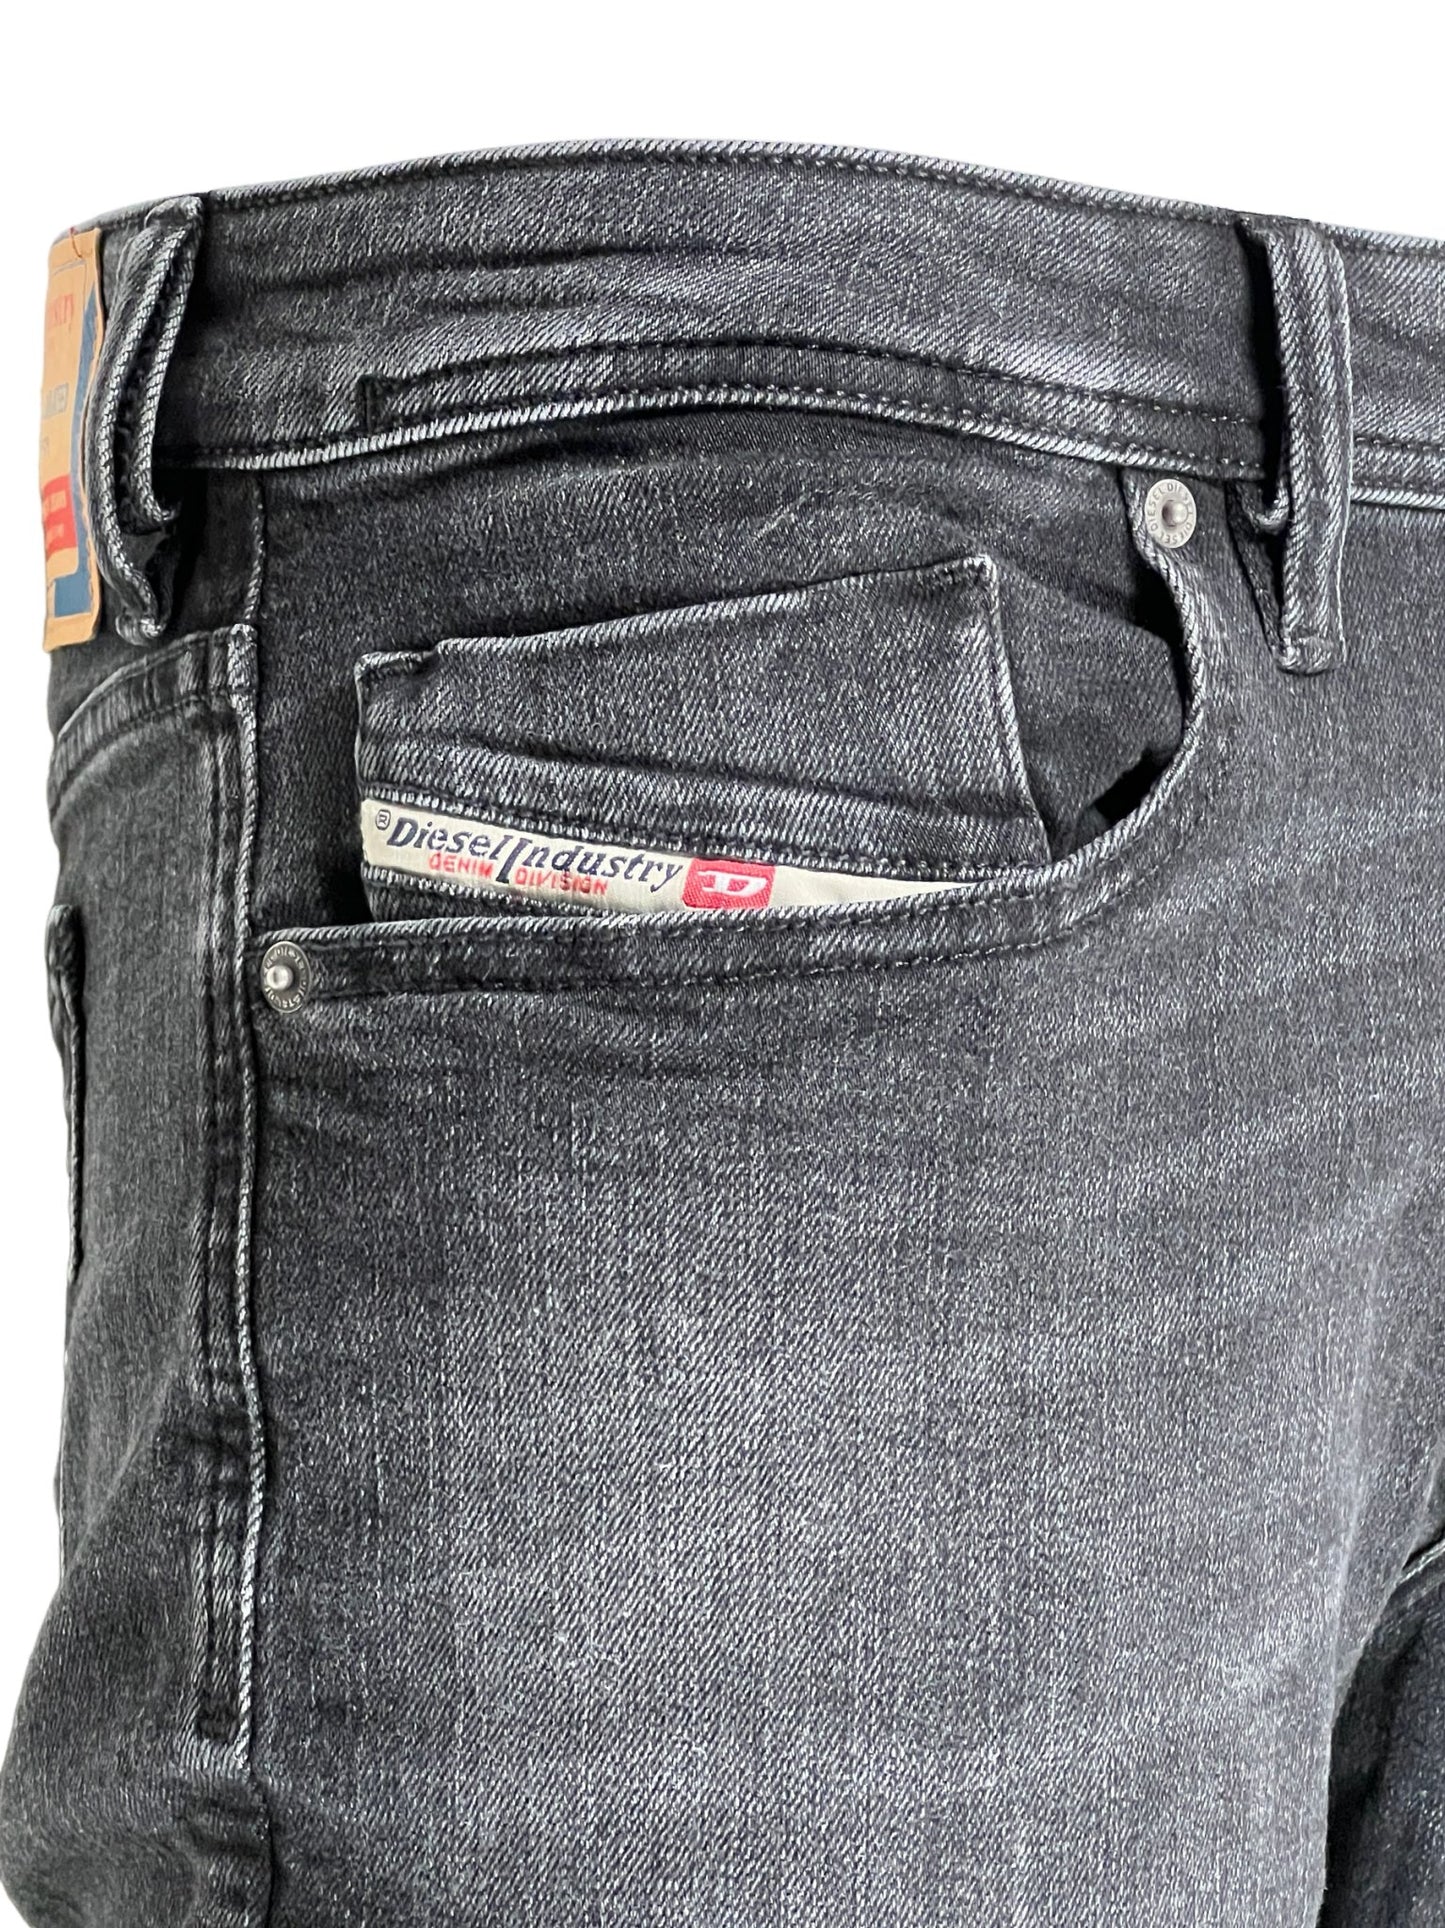 Close-up of black stretch denim jeans with a DIESEL 1979 SLEENKER PFAX brand label on the pocket.